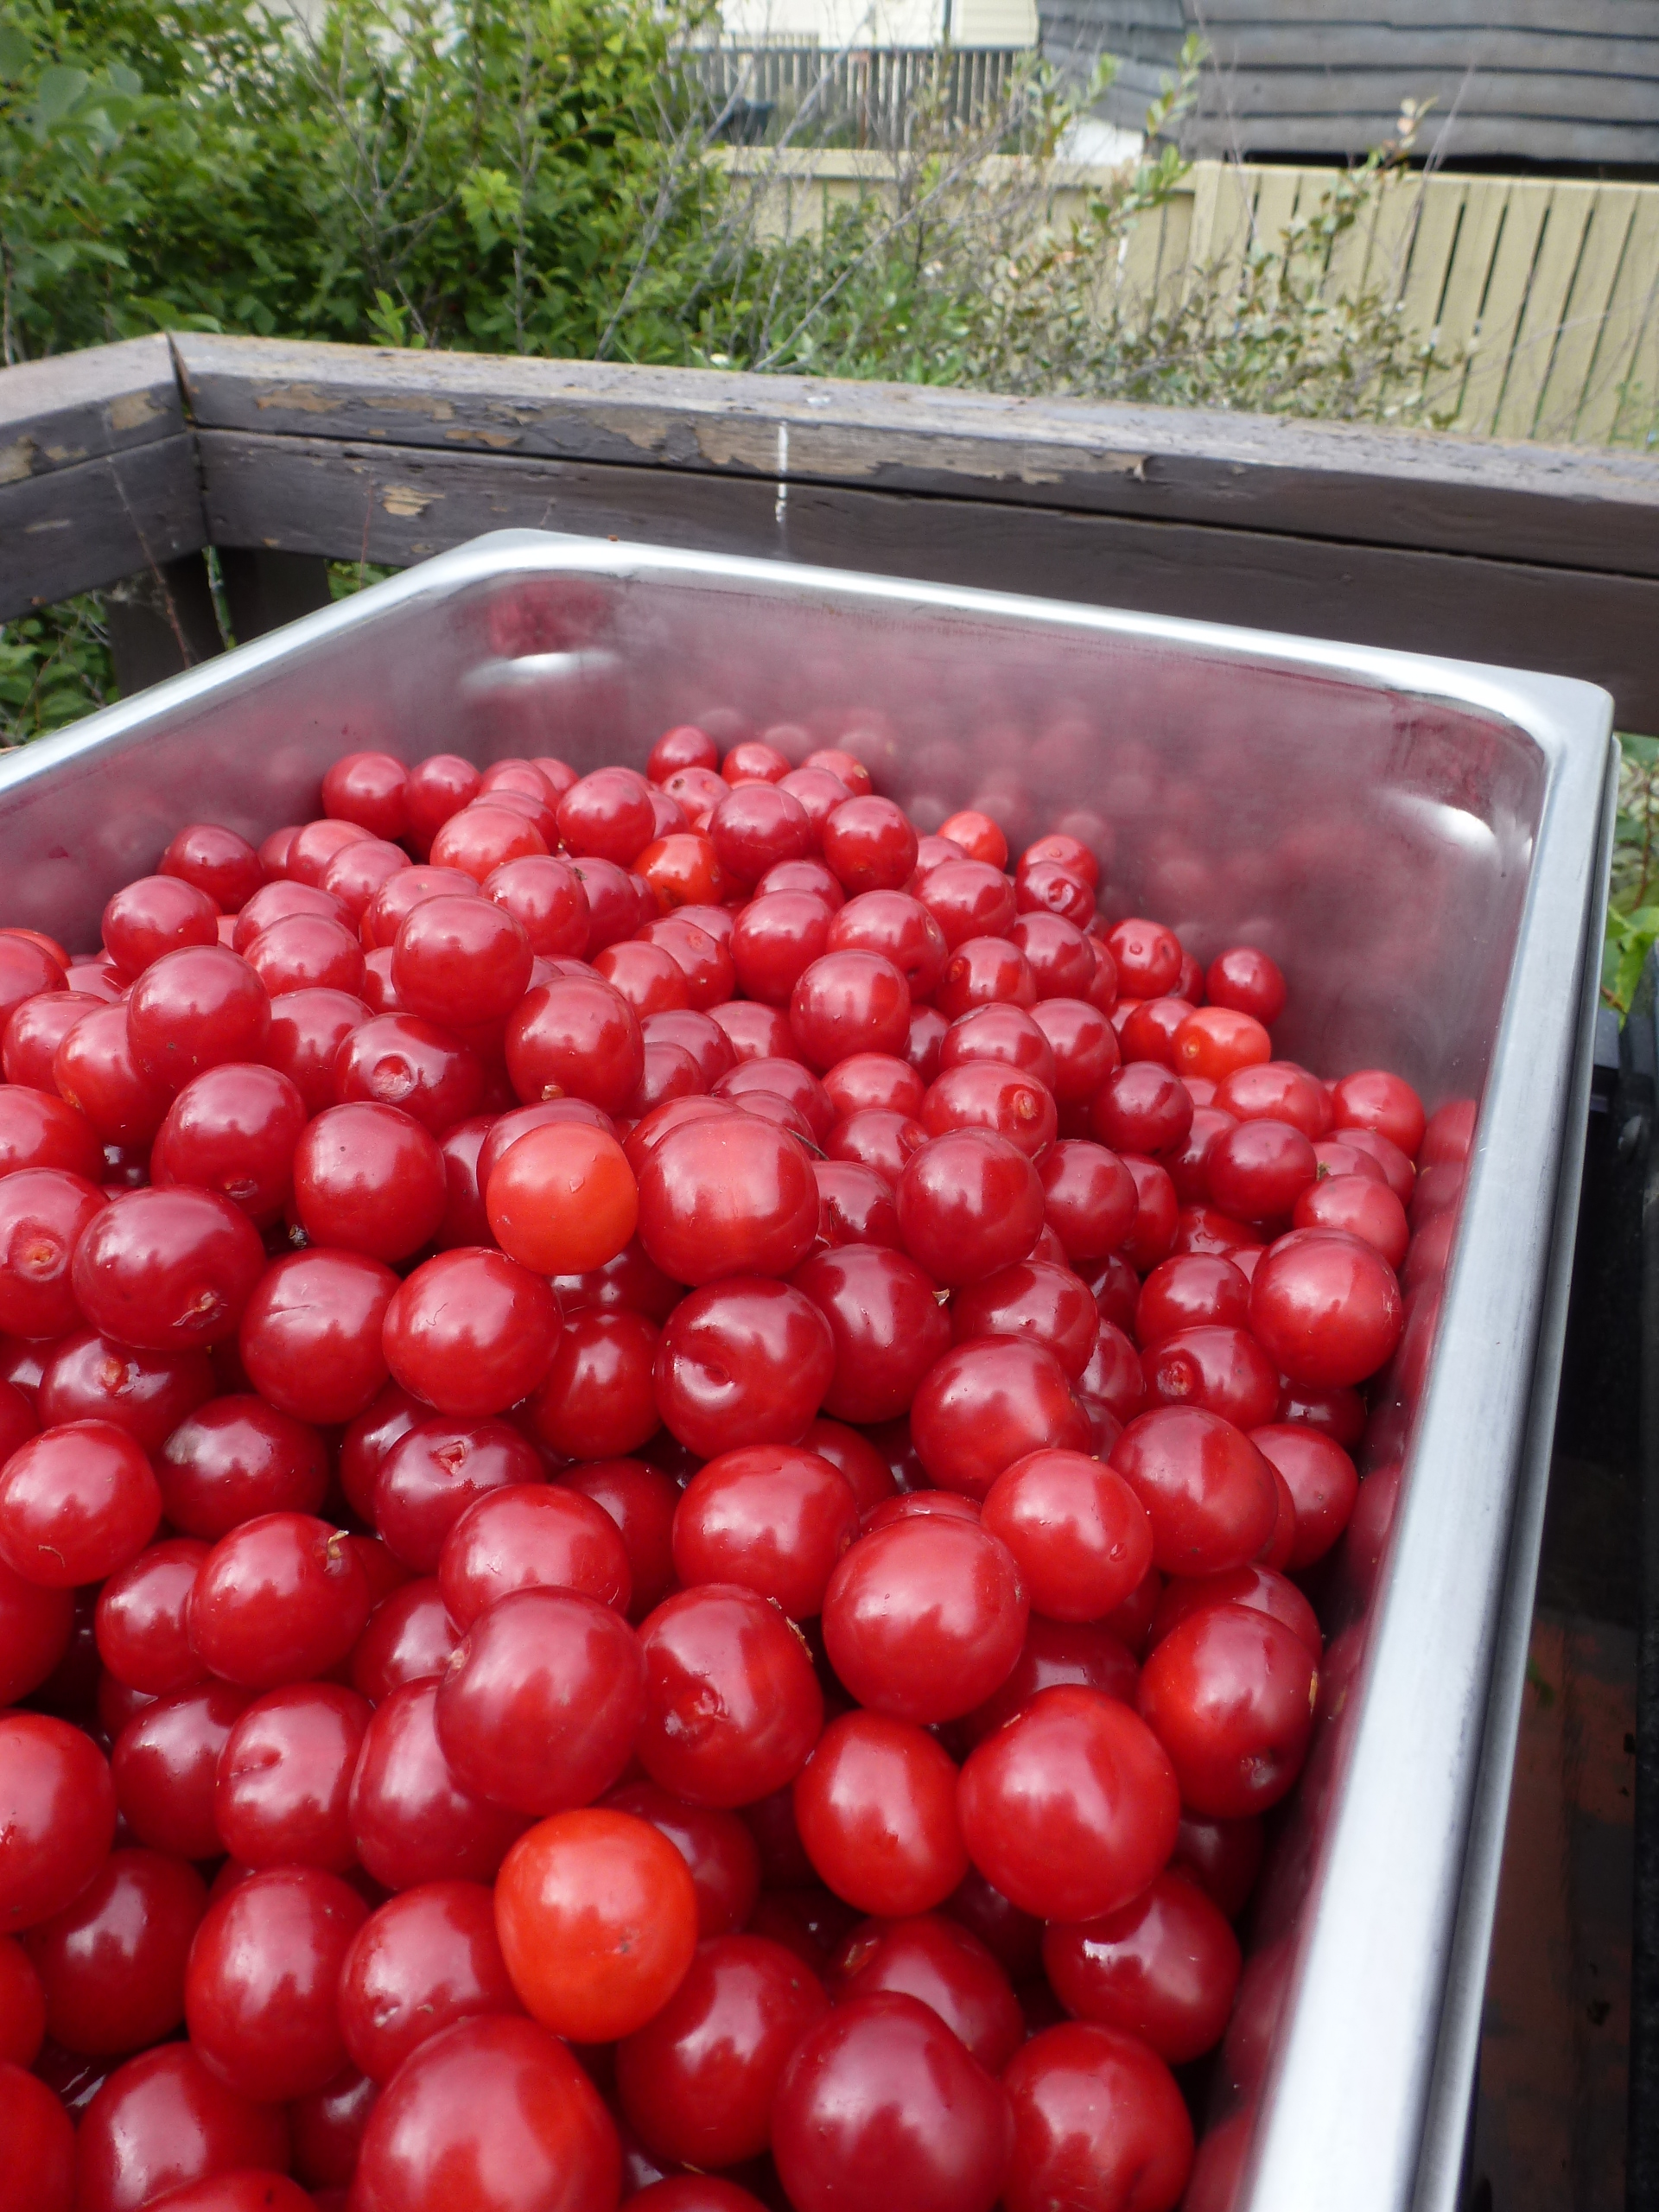 A tub of Evans cherries from a tree in Spruce Grove, Alberta.